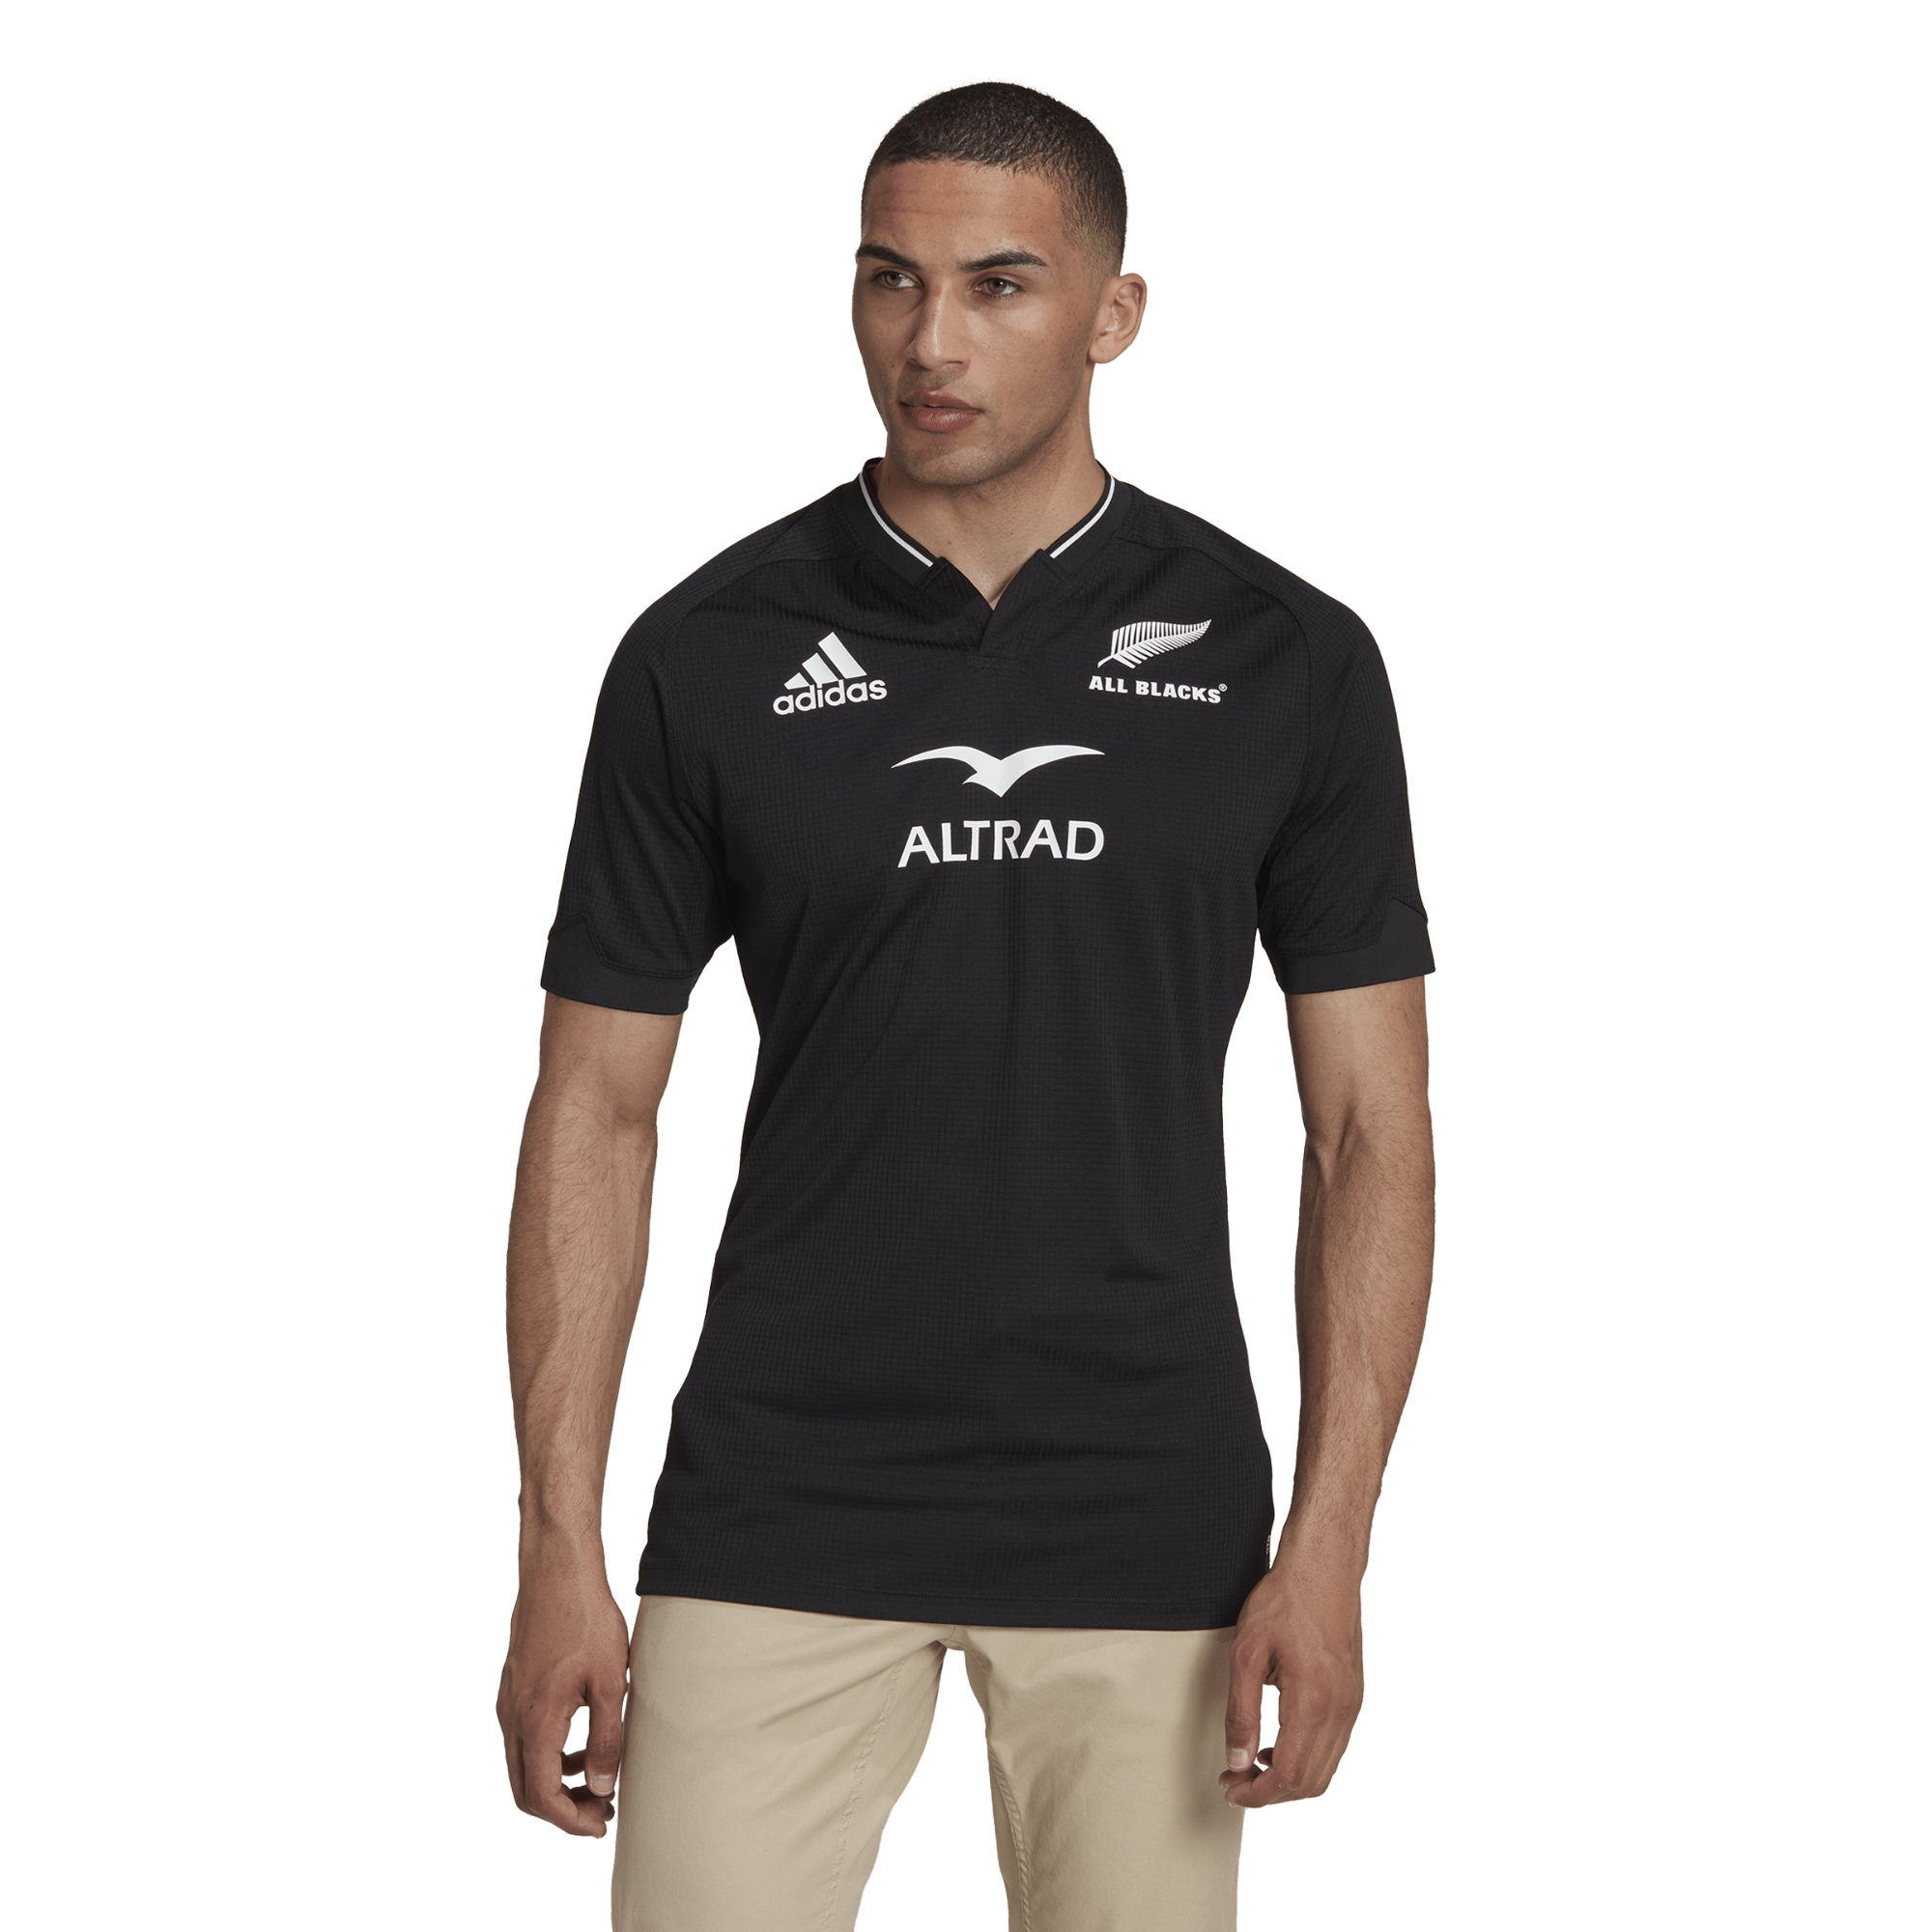 All Blacks Home Jersey 22/23 by adidas Official New Zealand Rugby Replica Shirt - Black - World Rugby Shop